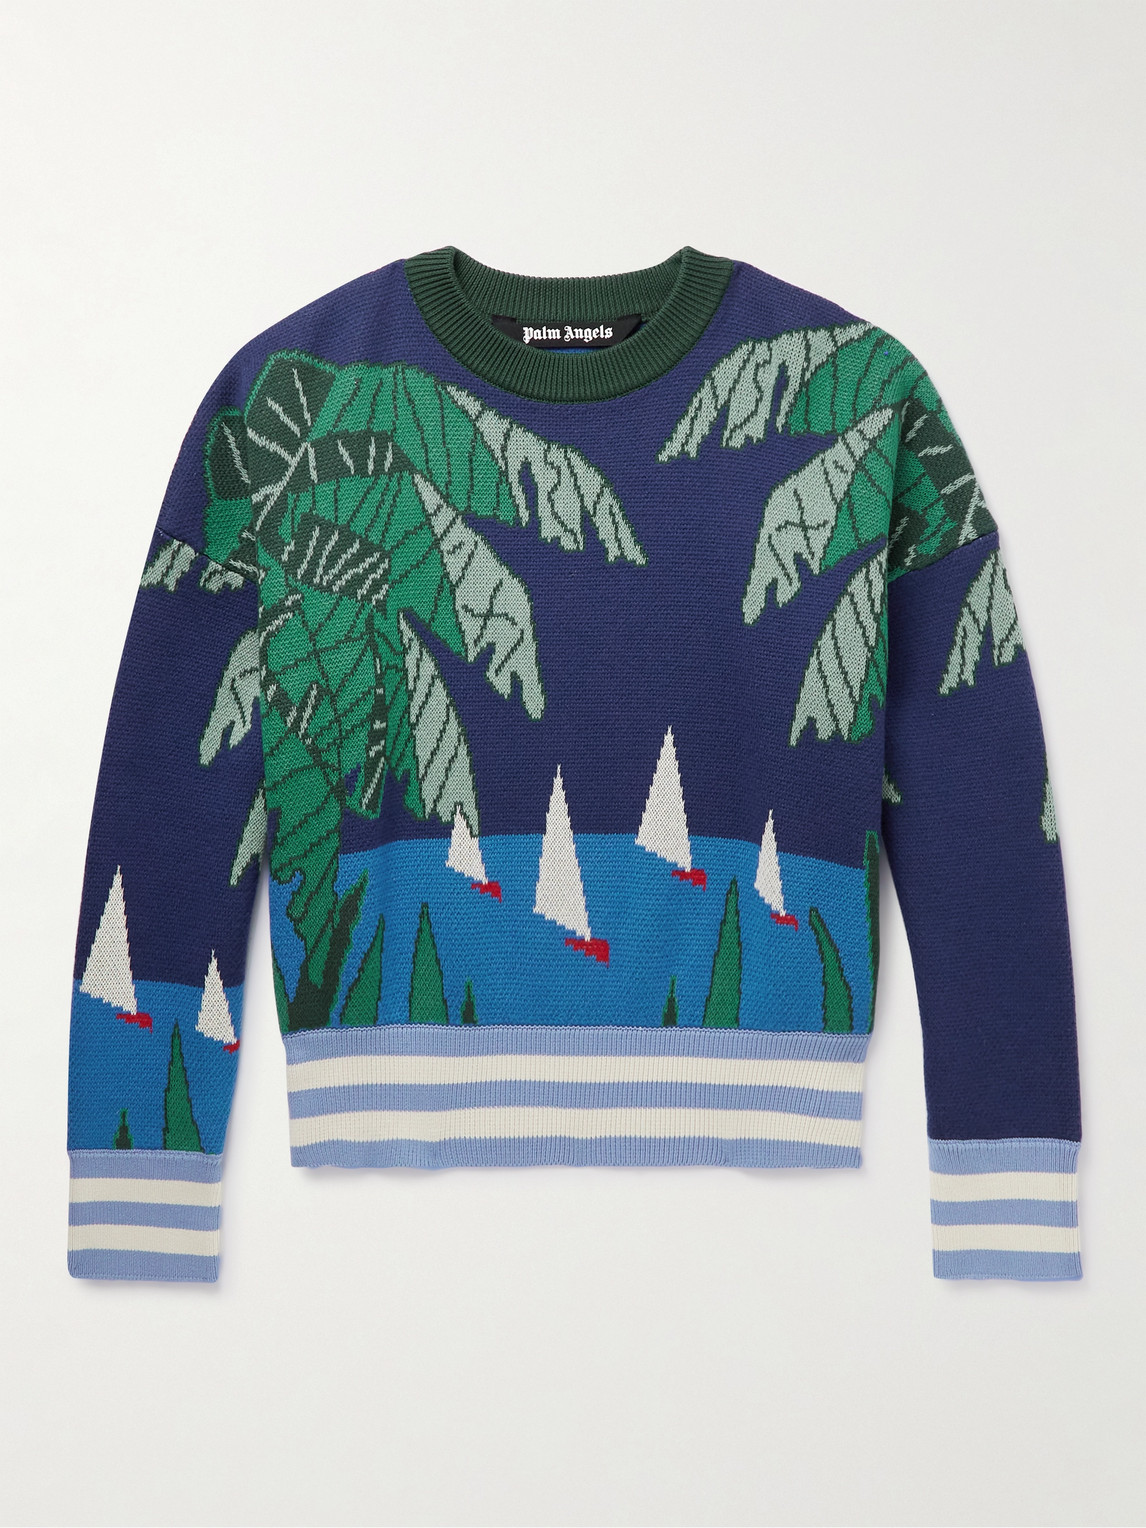 PALM ANGELS CROPPED WOOL-JACQUARD SWEATER